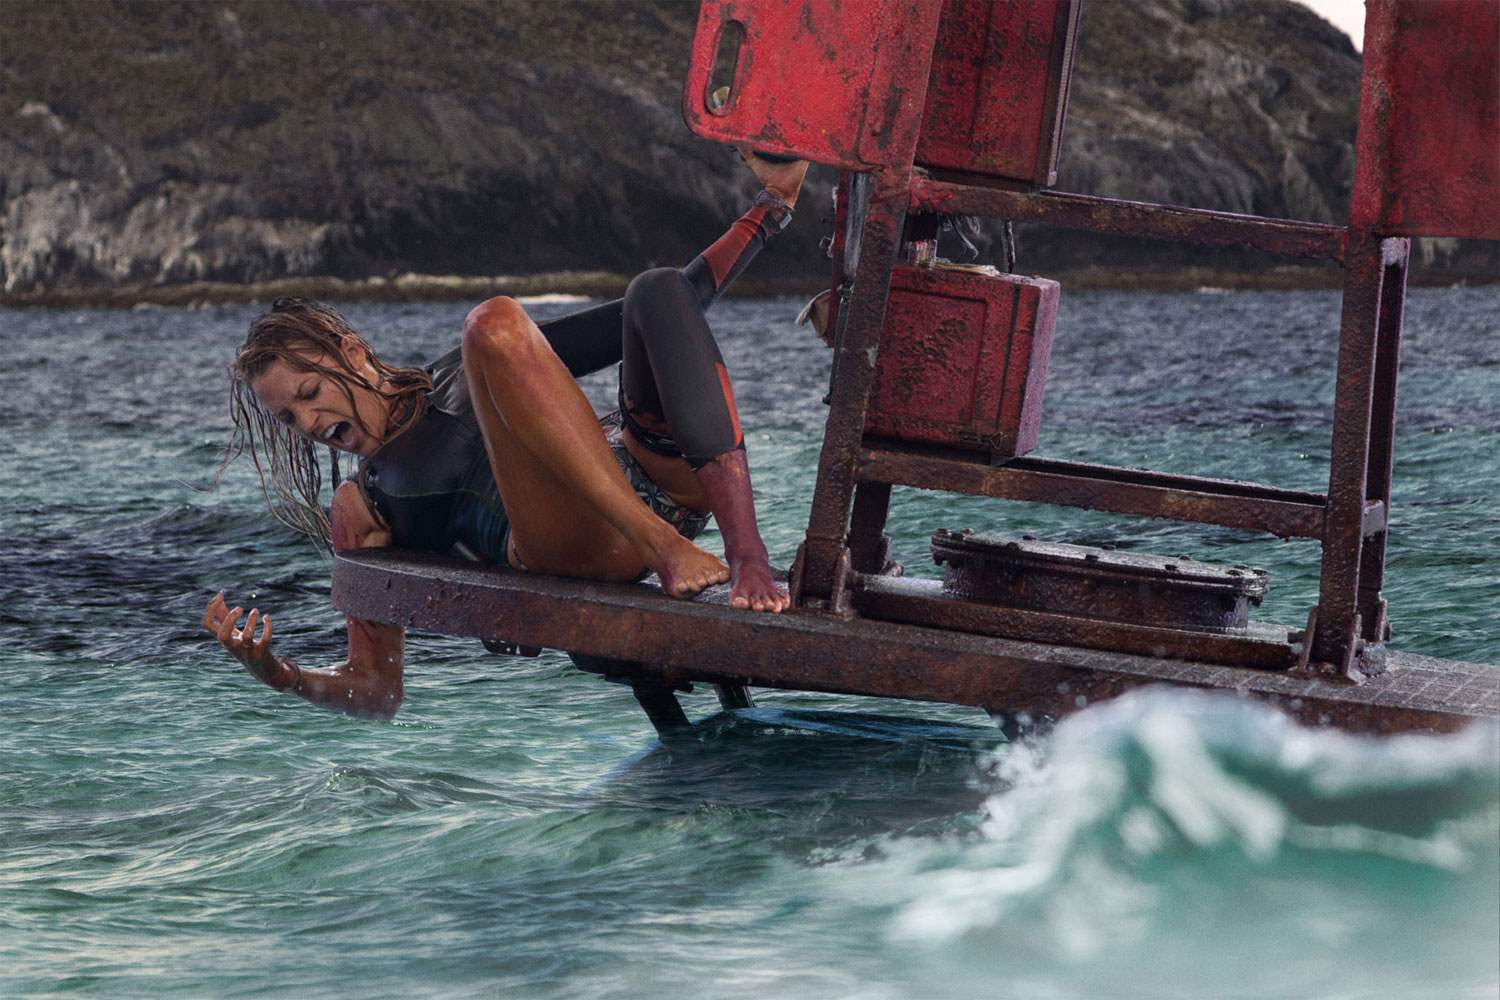 Blake Lively in The Shallows horror buoy